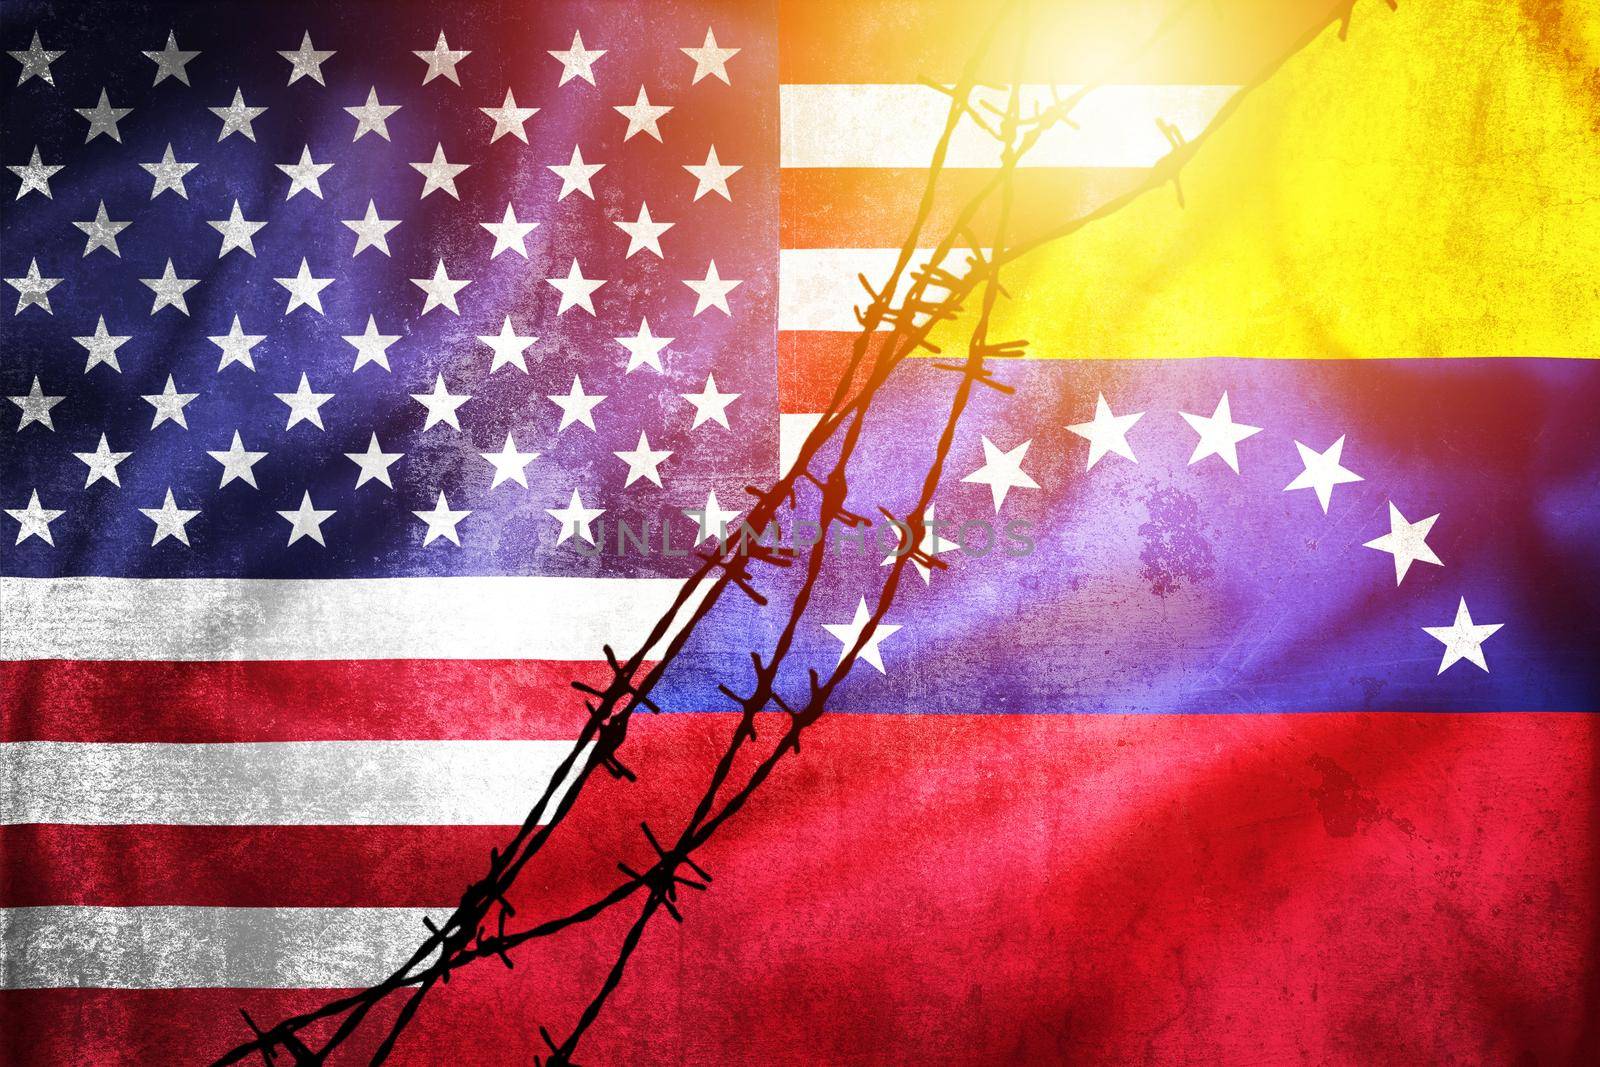 Grunge flags of USA and Venezuela divided by barb wire sun haze illustration by xbrchx